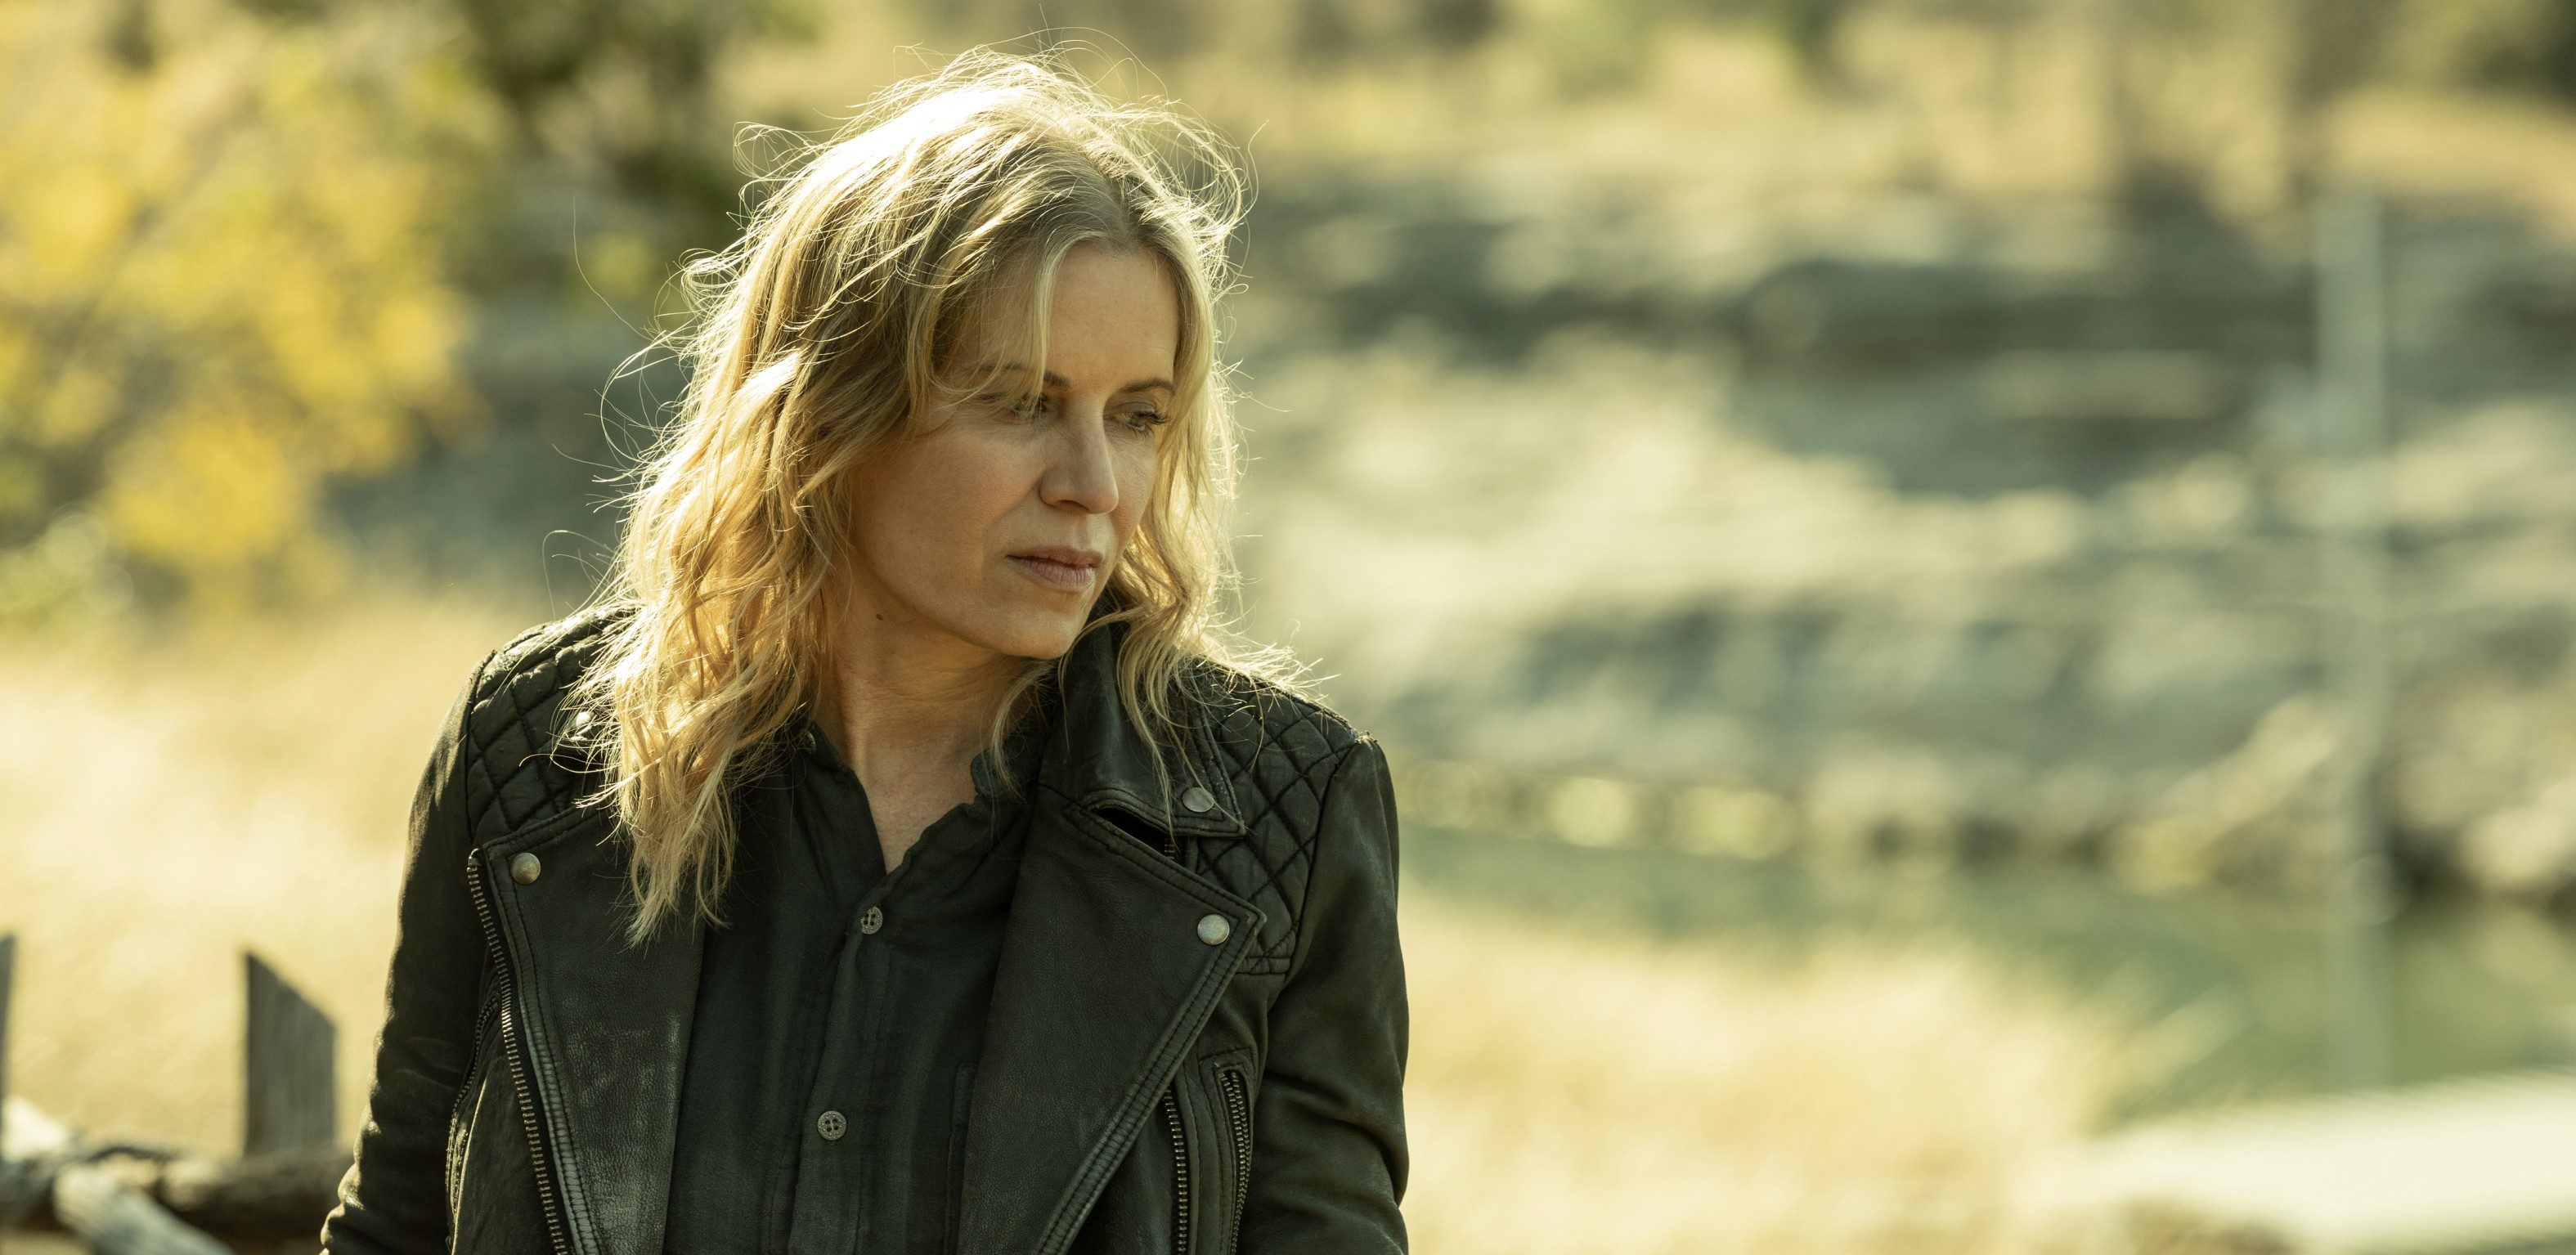 How Did Madison Escape From the Burning Stadium? Will Kim Dickens Return in Fear the Walking Dead Season 8?